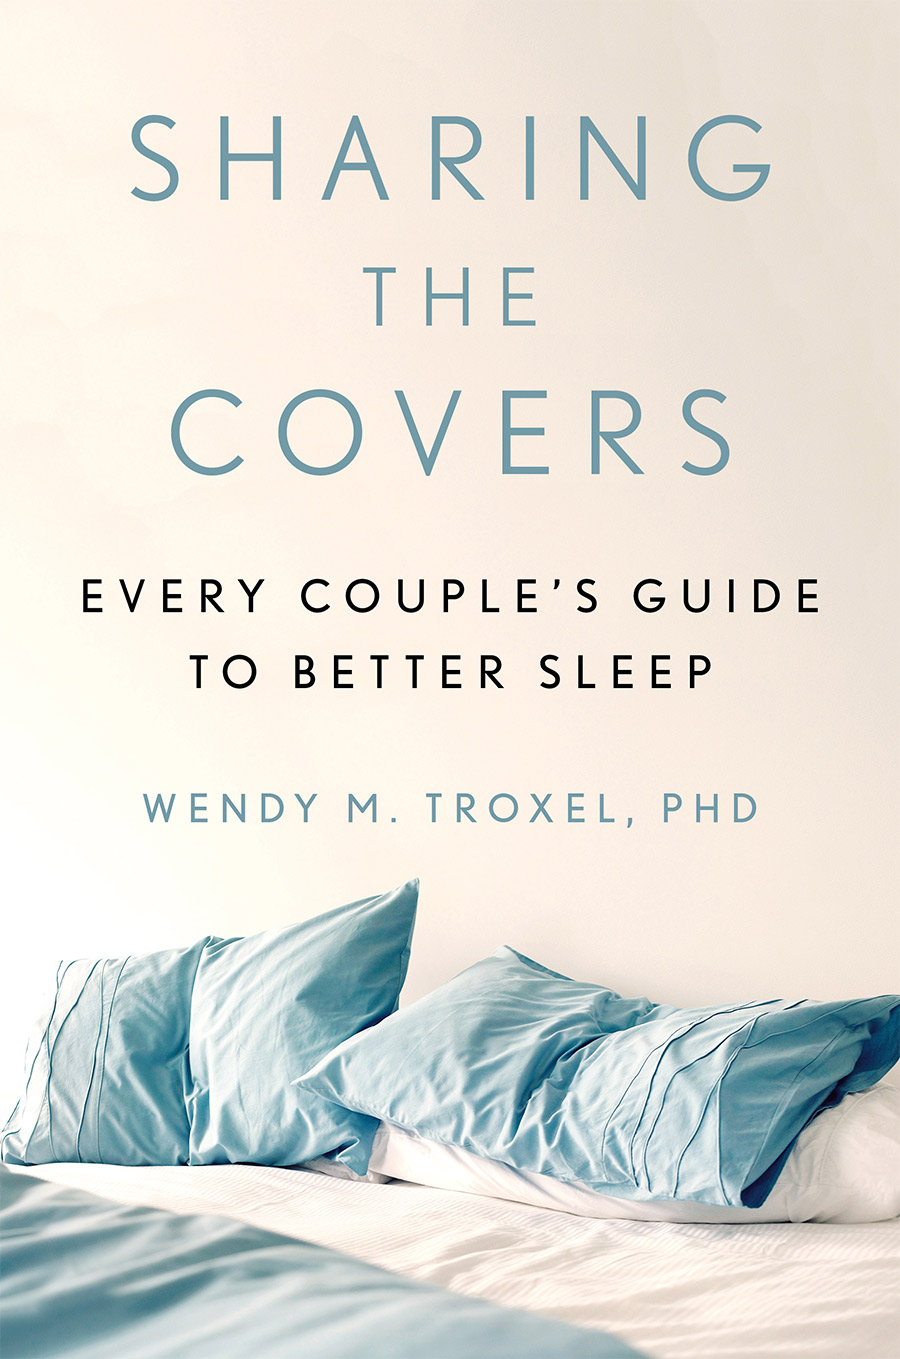 Sharing the Covers: Every couple's guide to better sleep book cover